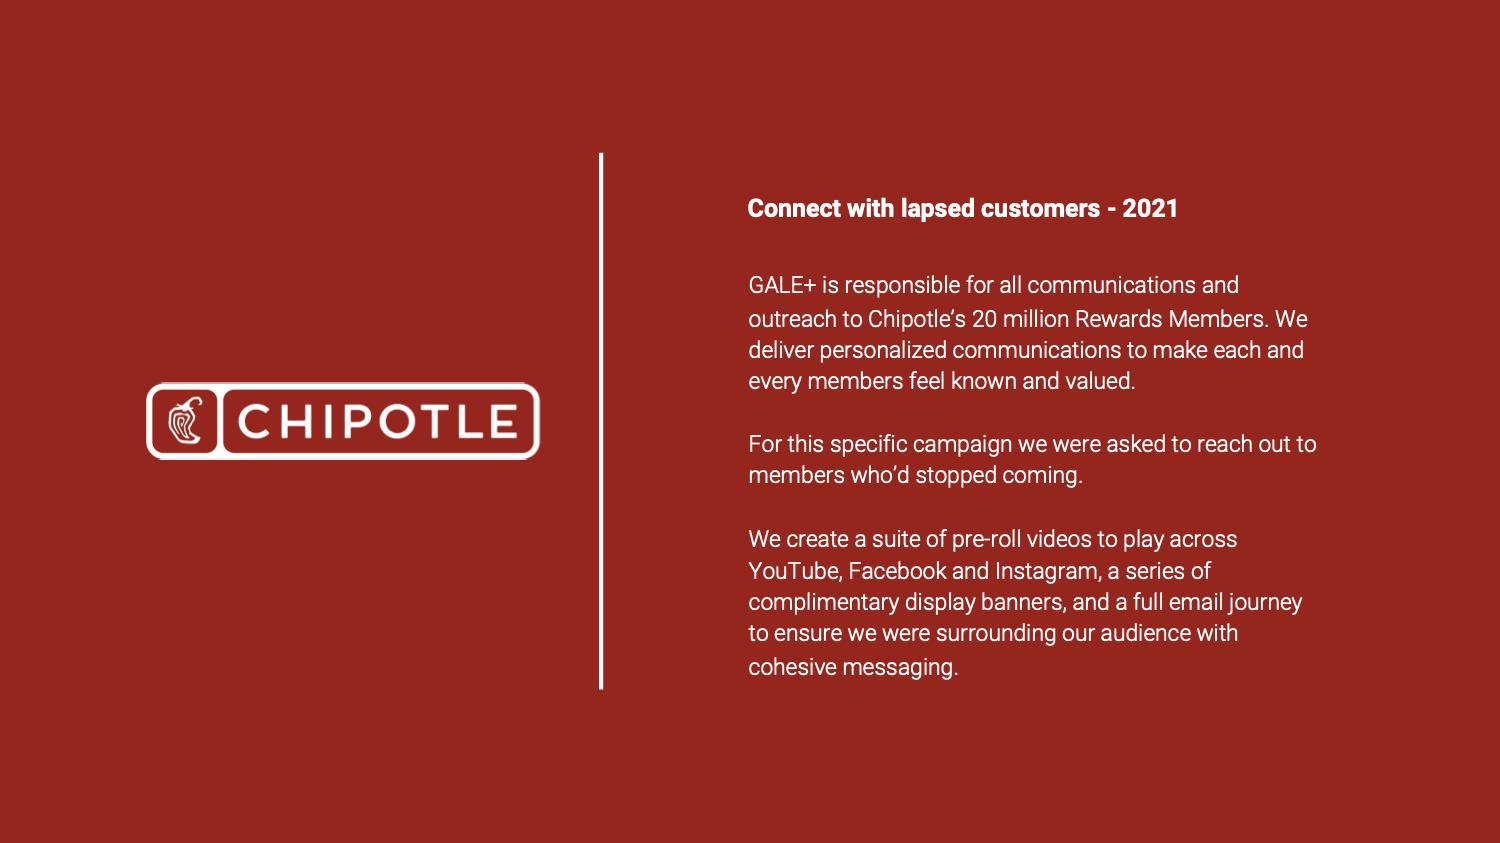 GALE+ for Chipotle